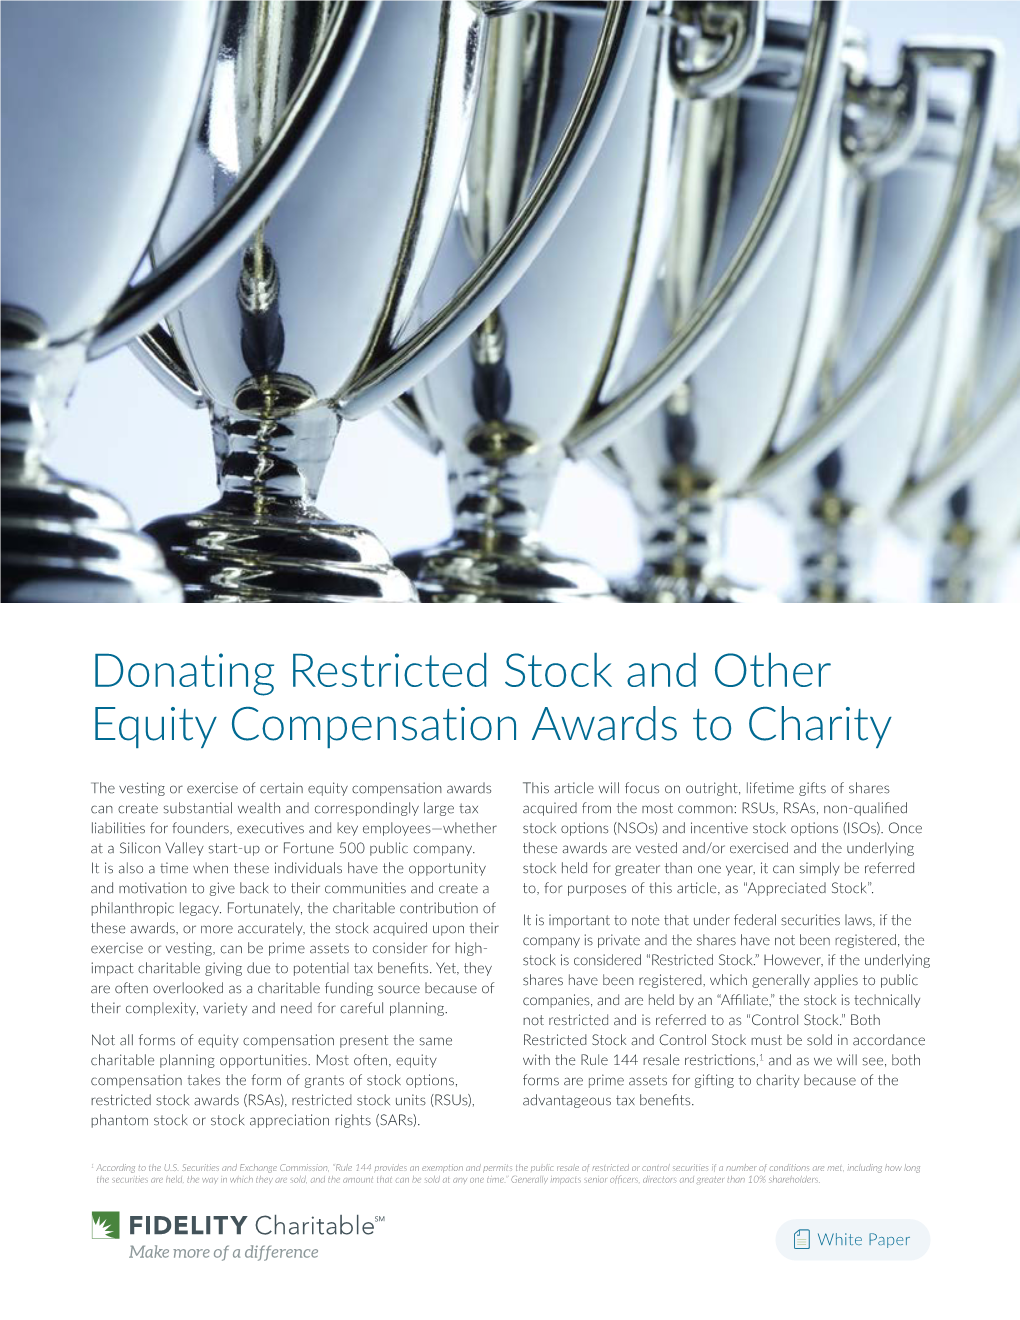 Donating Restricted Stock and Other Equity Compensation Awards to Charity